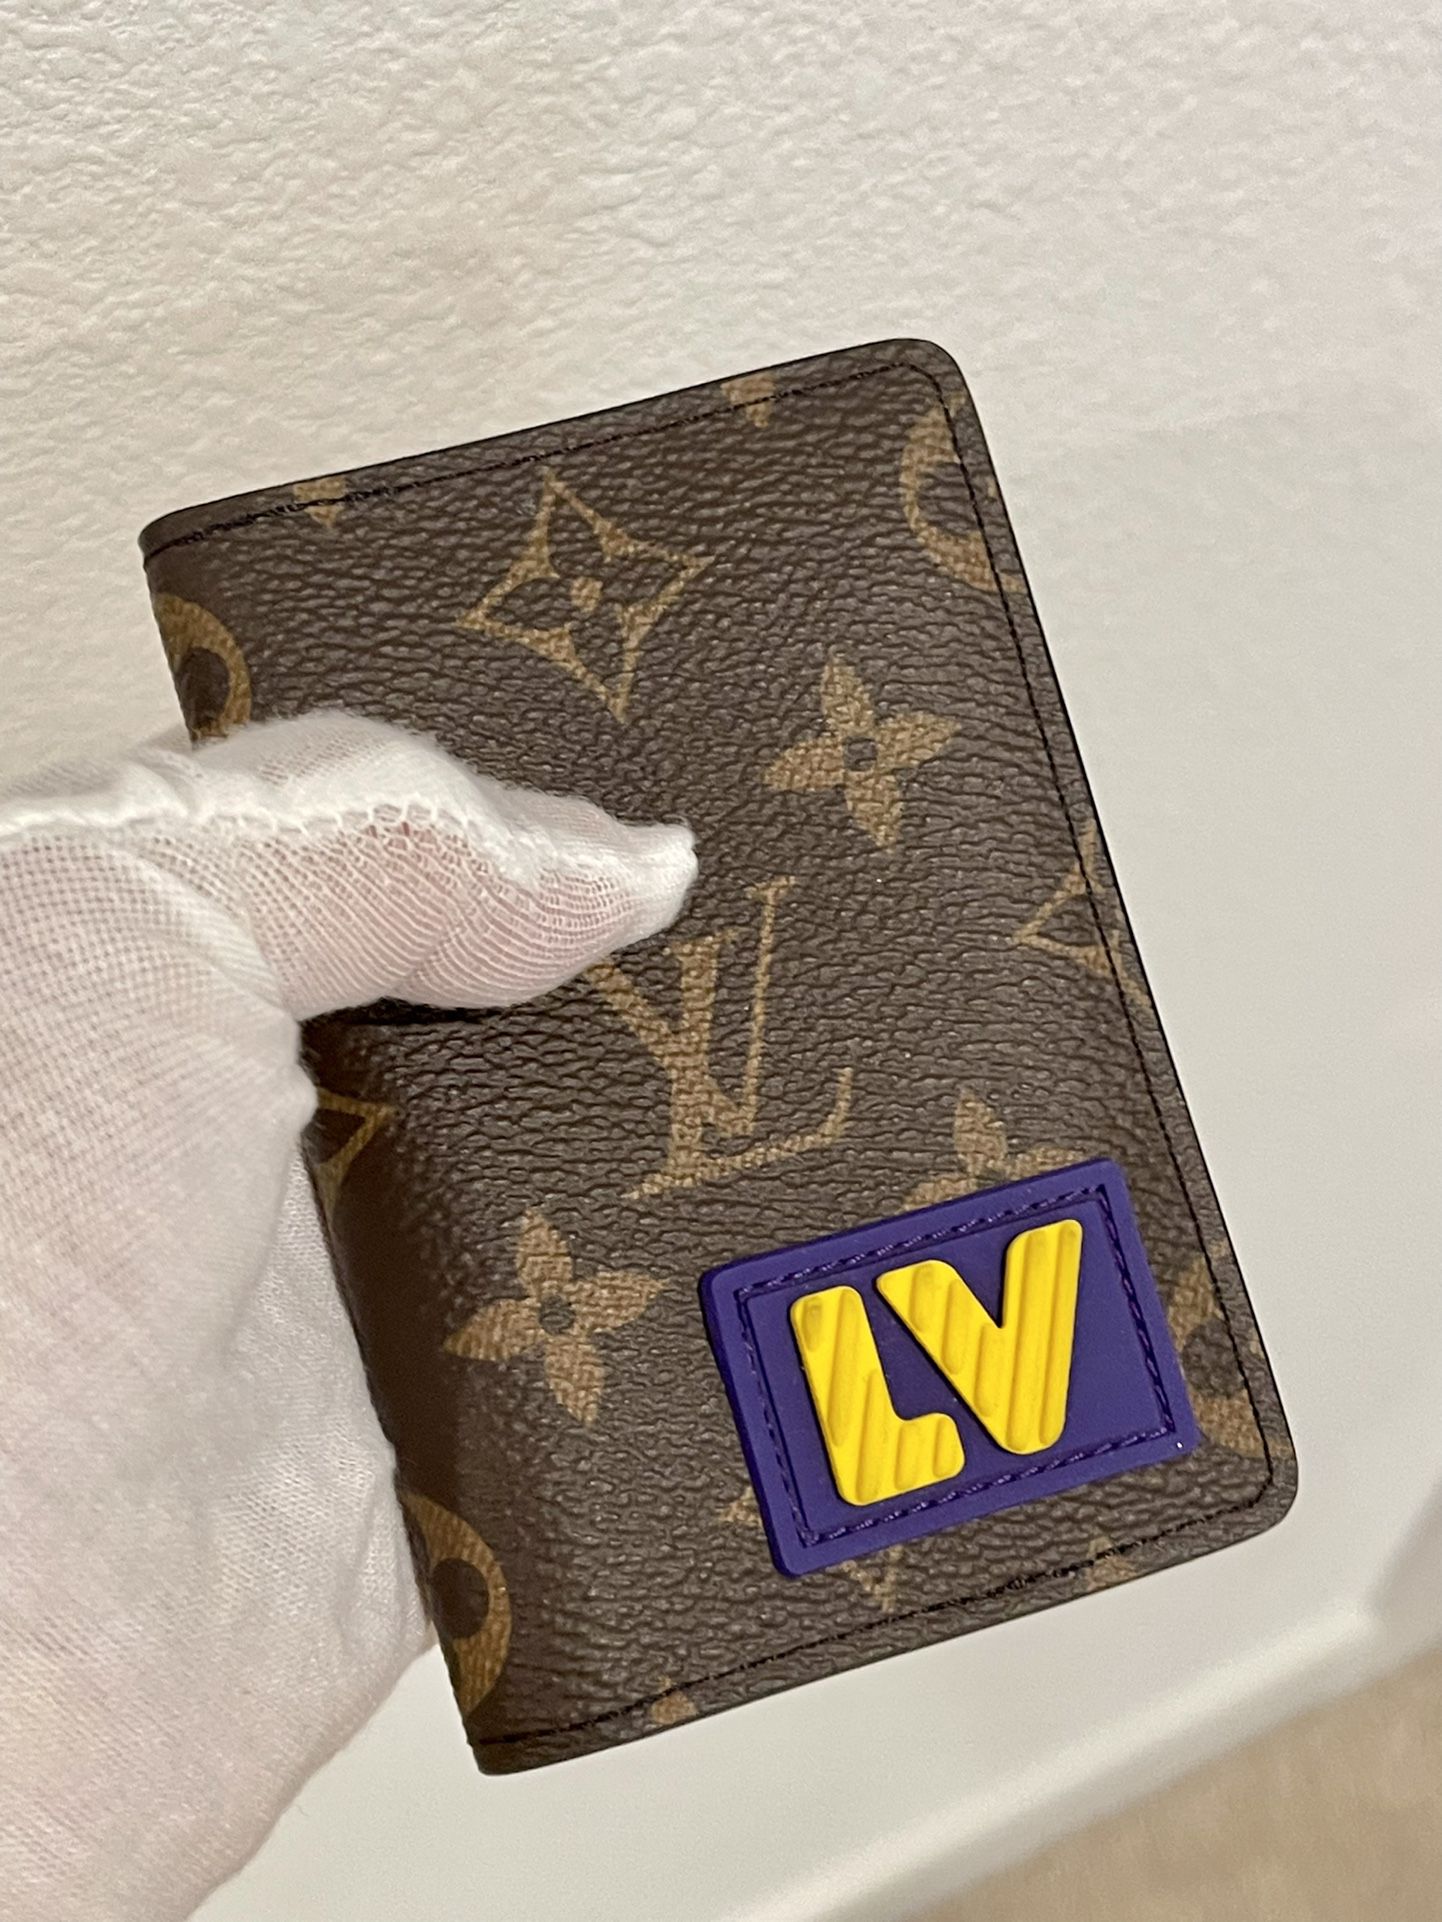 Louis Vuitton Limited Edition Pocket Organizer for Sale in Fairfield, CA -  OfferUp